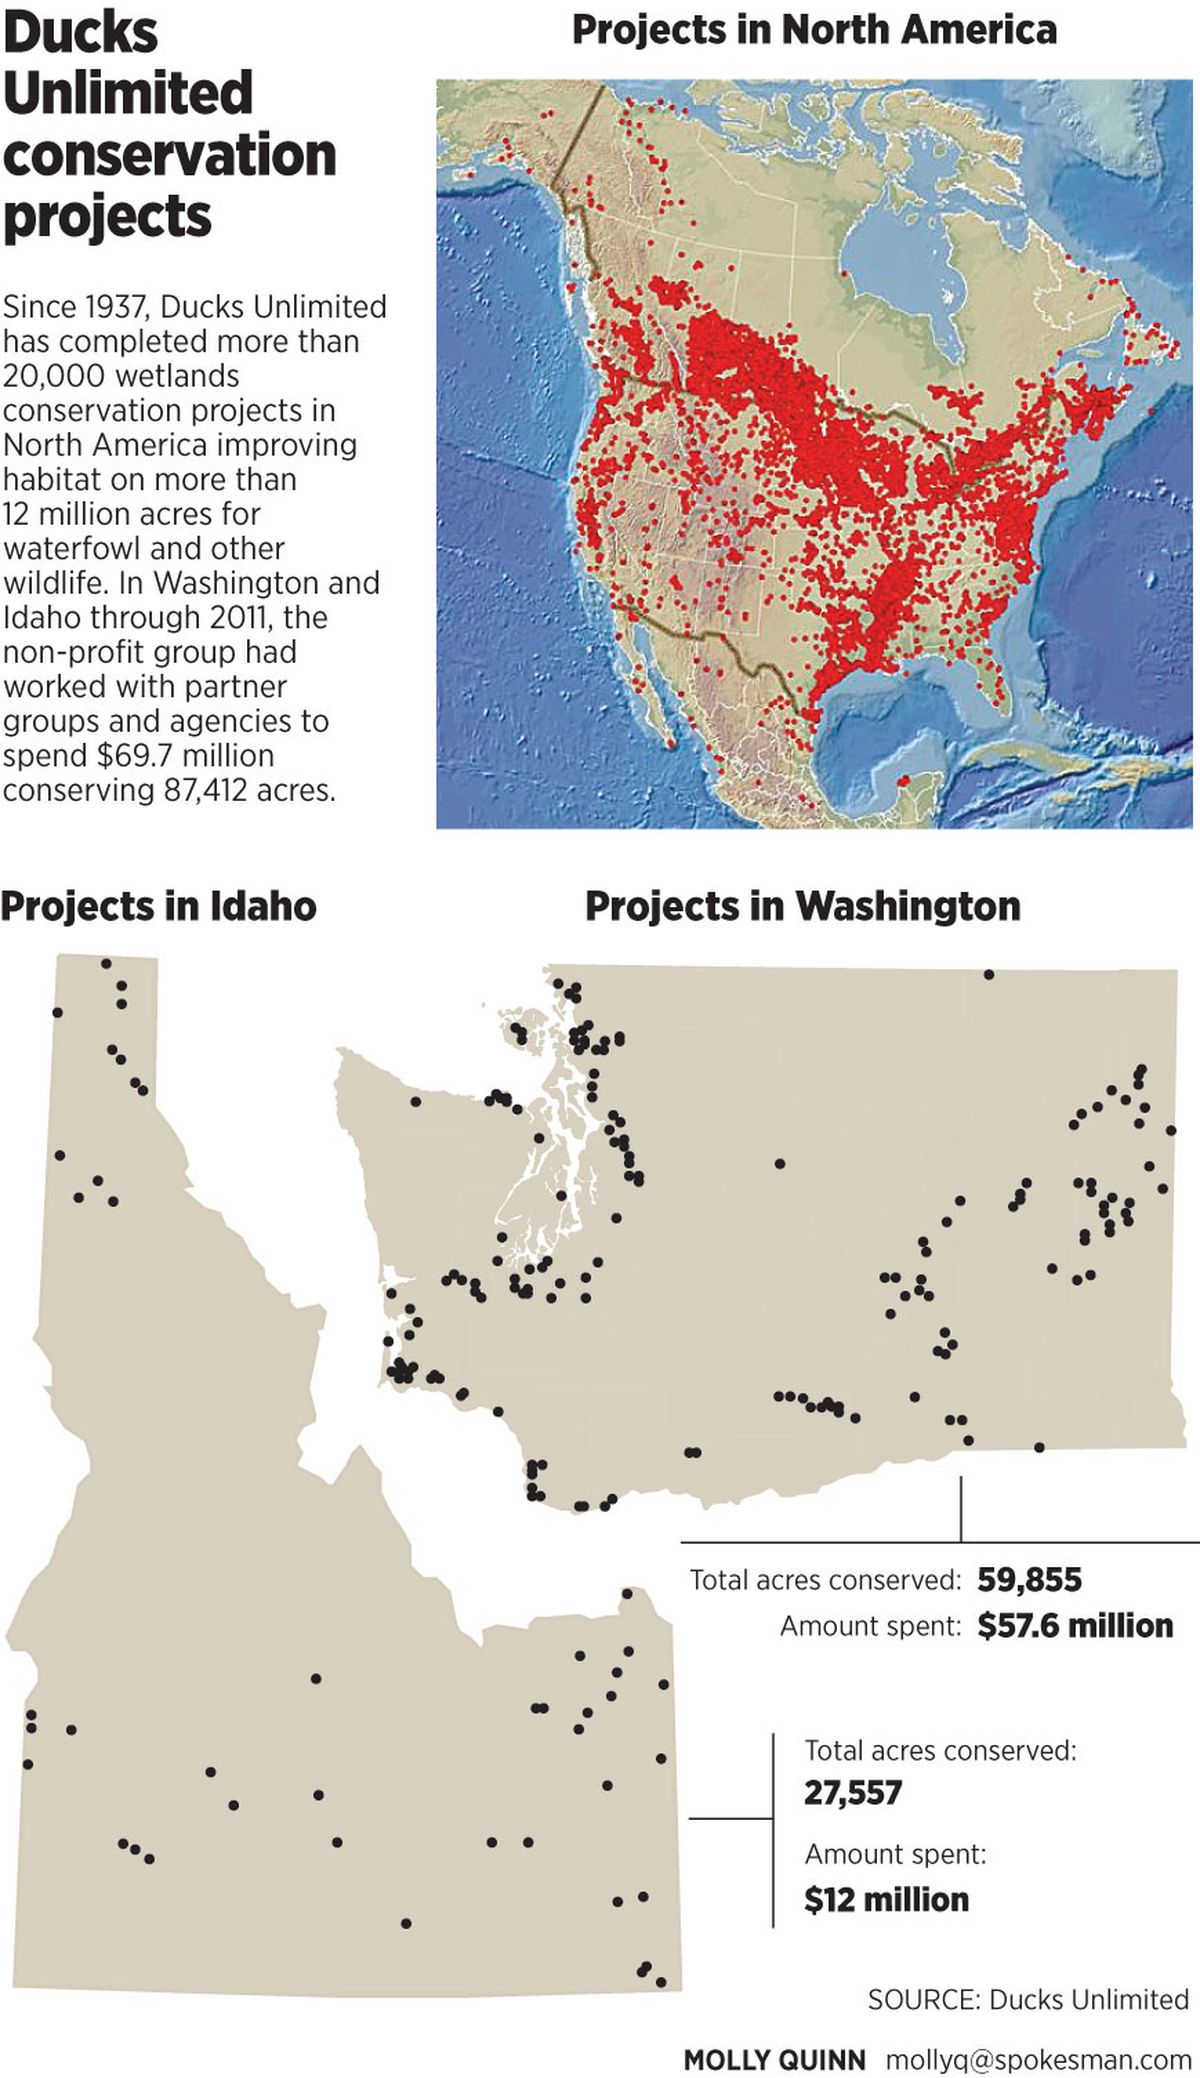 Graphic illustrates Duck Unlimited wetlands projects in Idaho, Washington and North America.